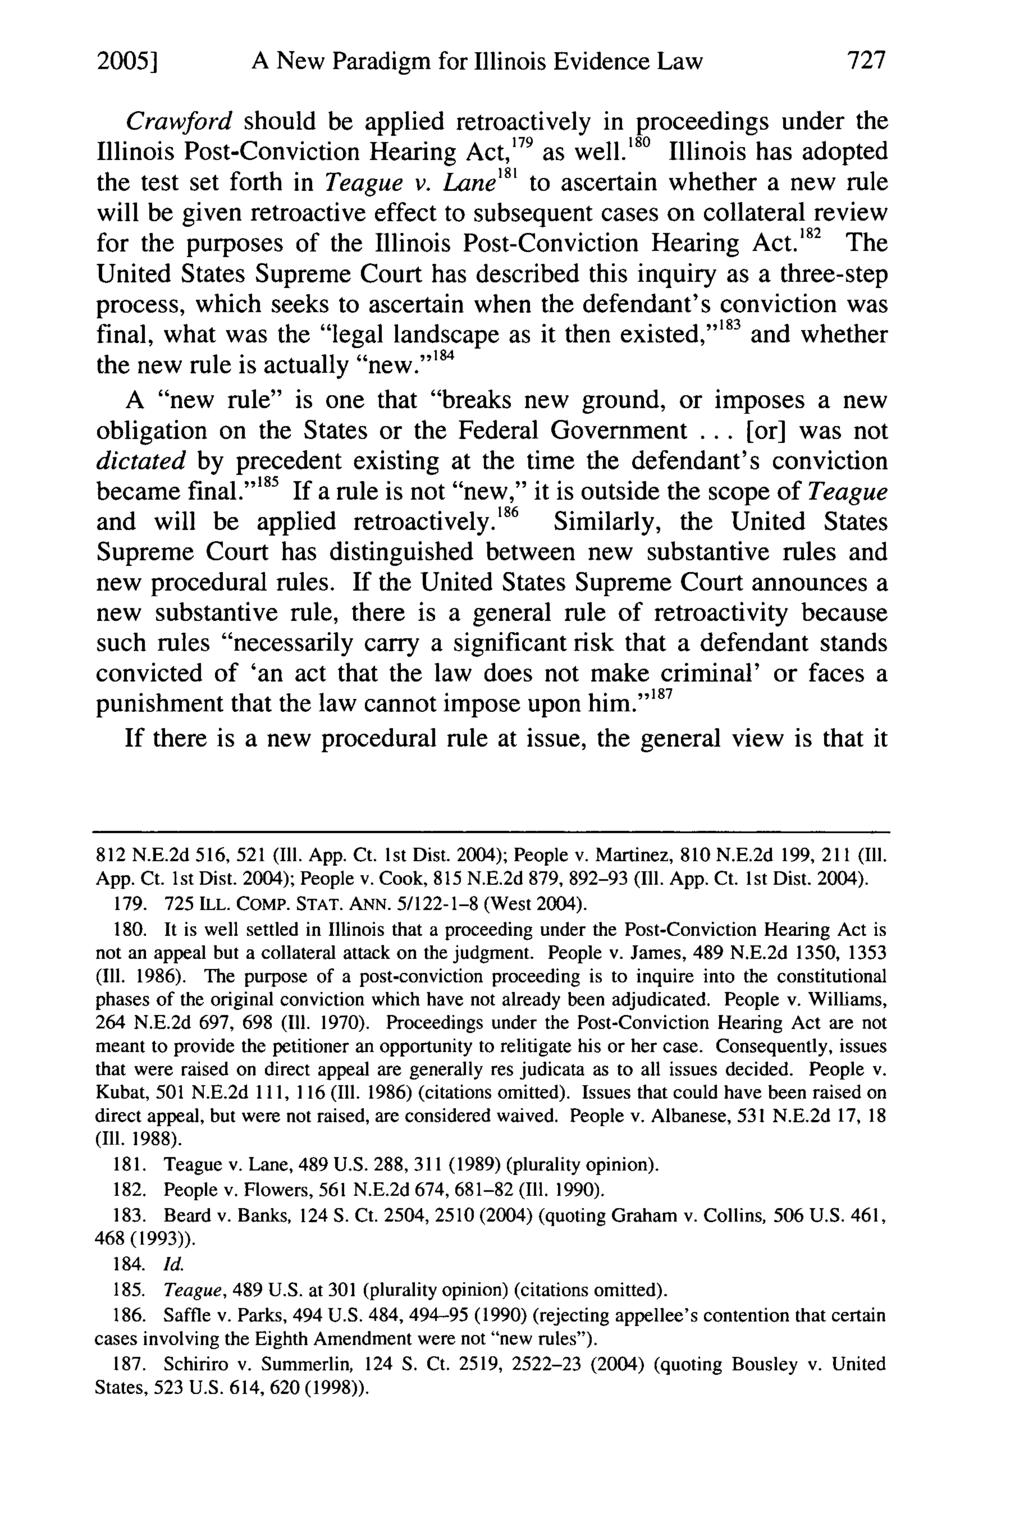 2005] A New Paradigm for Illinois Evidence Law Crawford should be applied retroactively in proceedings under the Illinois Post-Conviction Hearing Act, 179 as well.